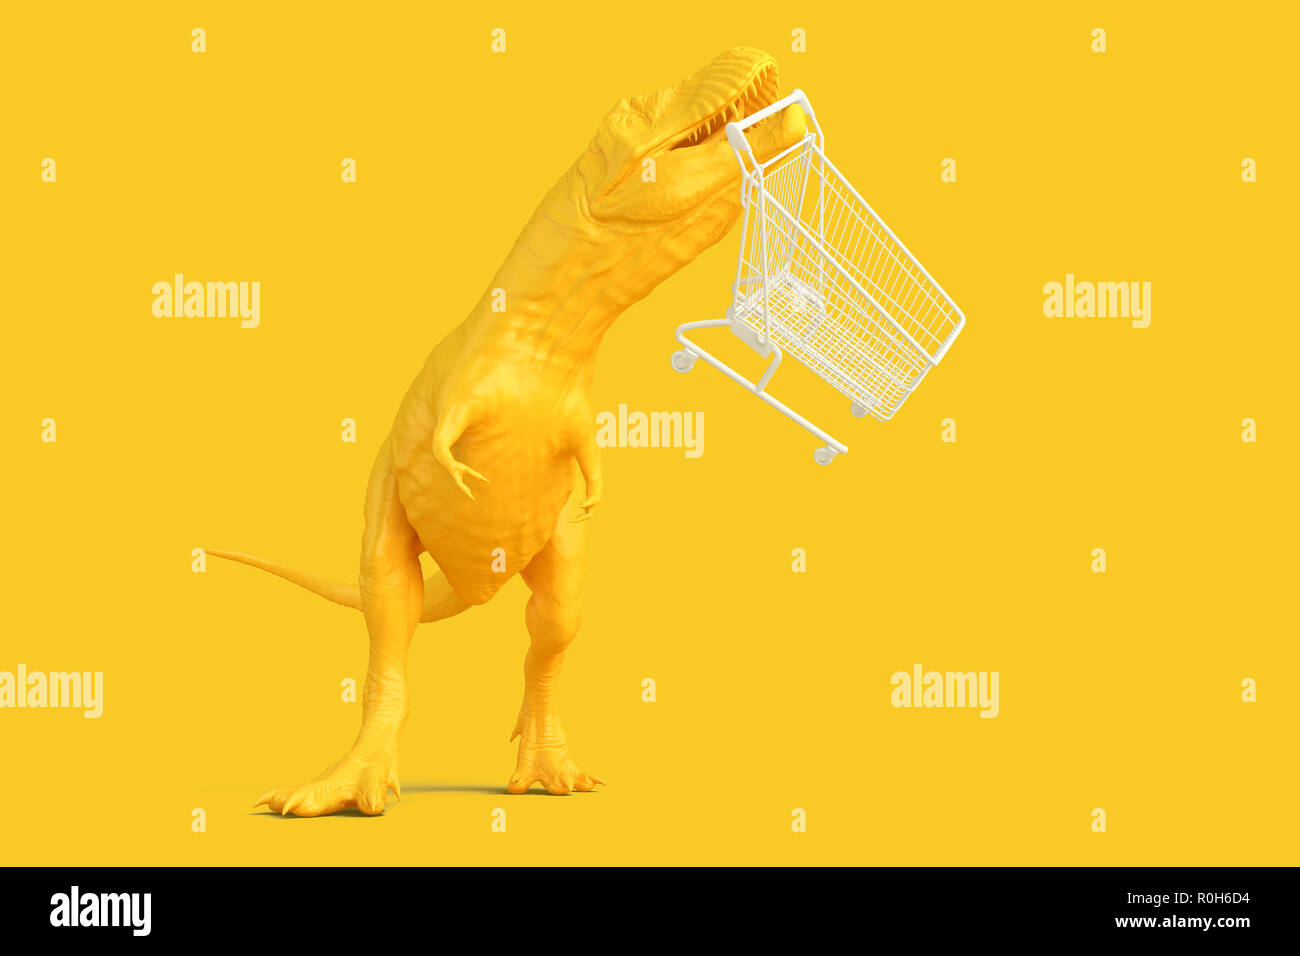 Dinosaur with shopping cart. 3D illustration. Contains clipping path. Stock Photo